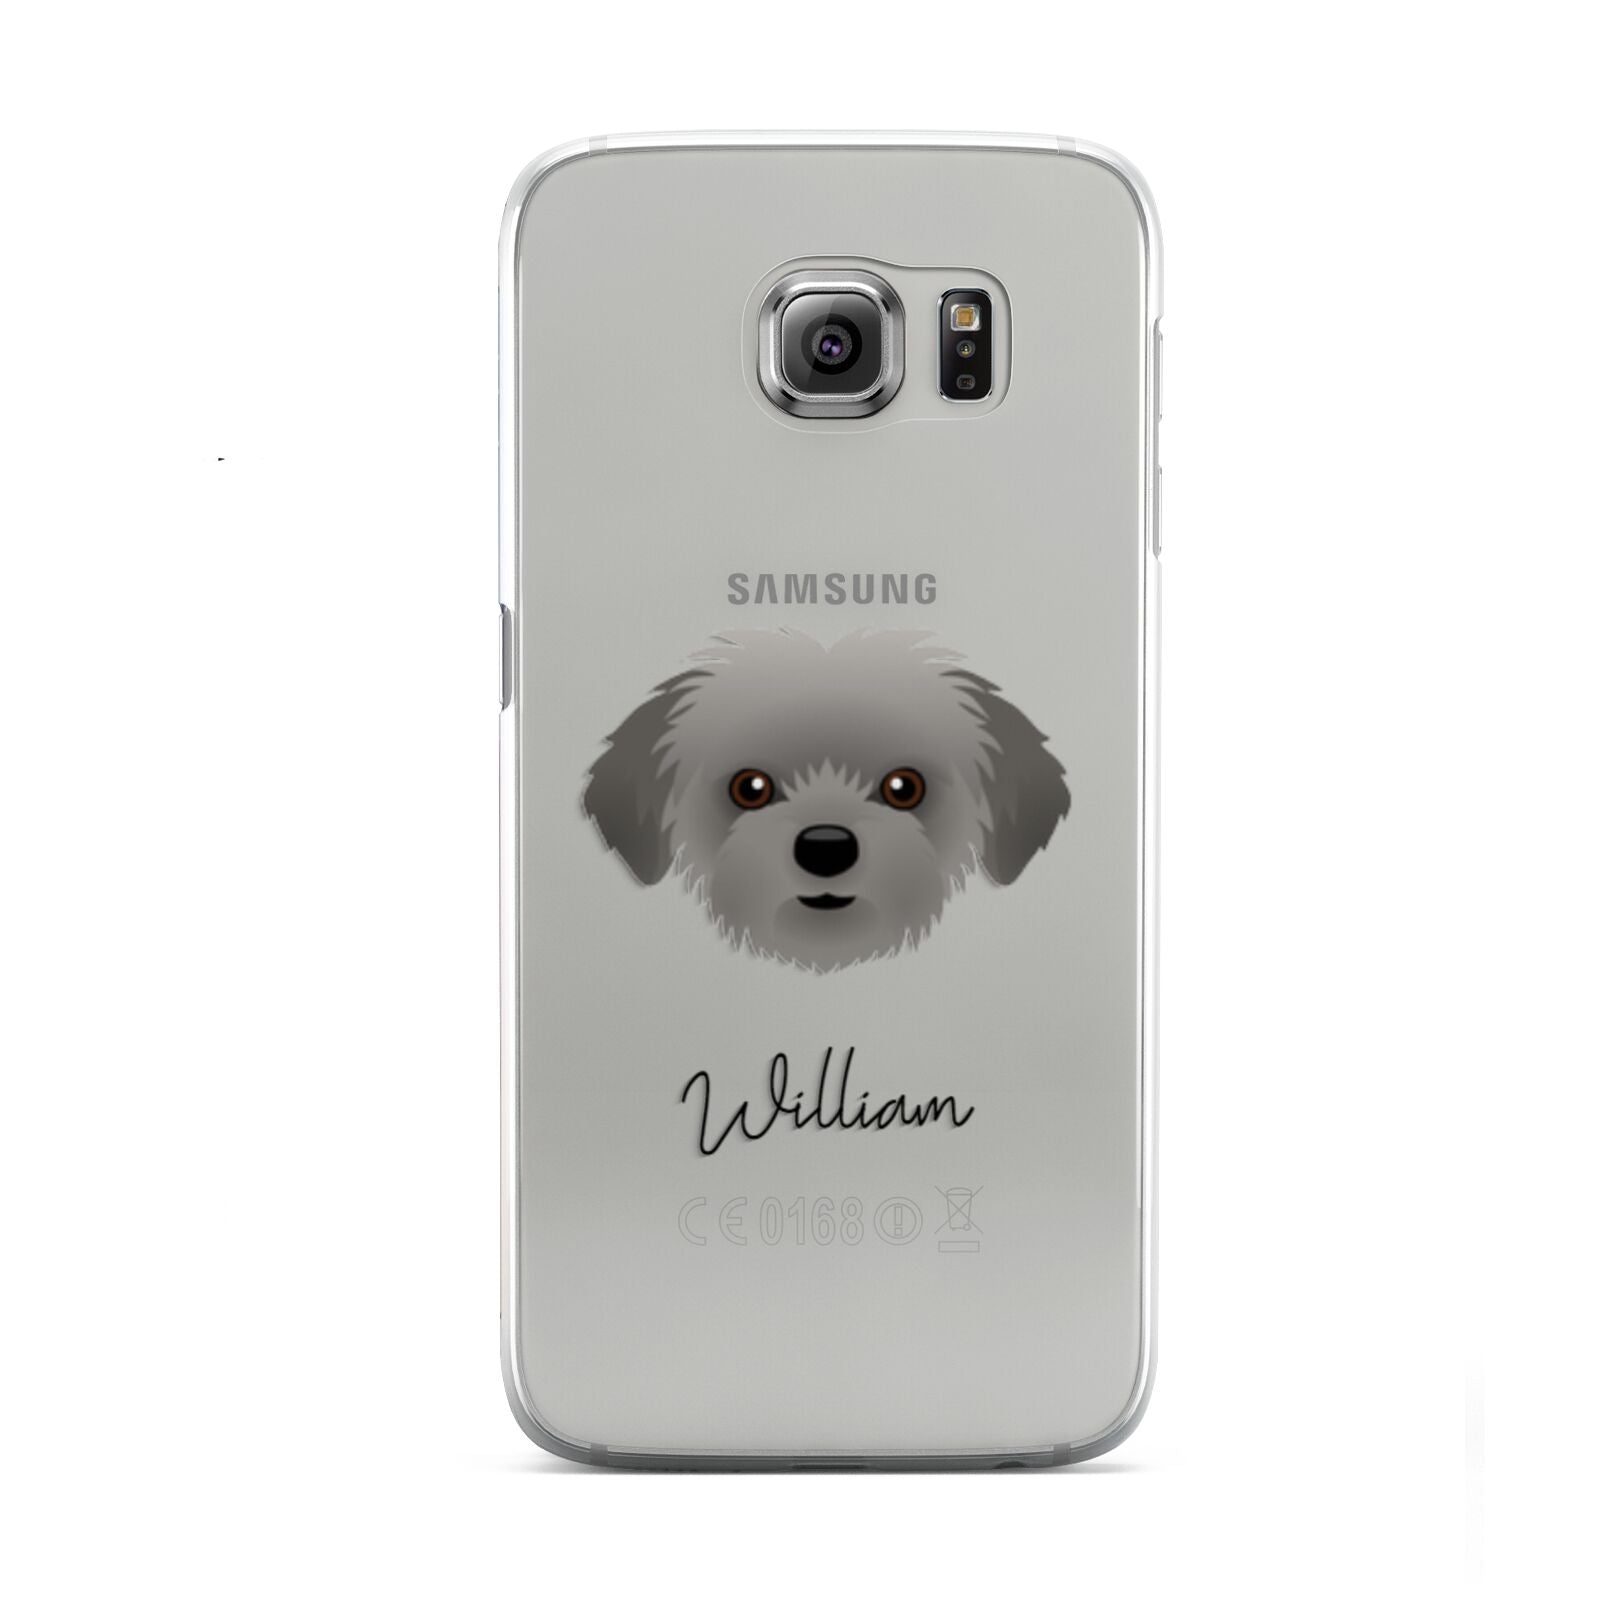 Shorkie Personalised Samsung Galaxy S6 Case